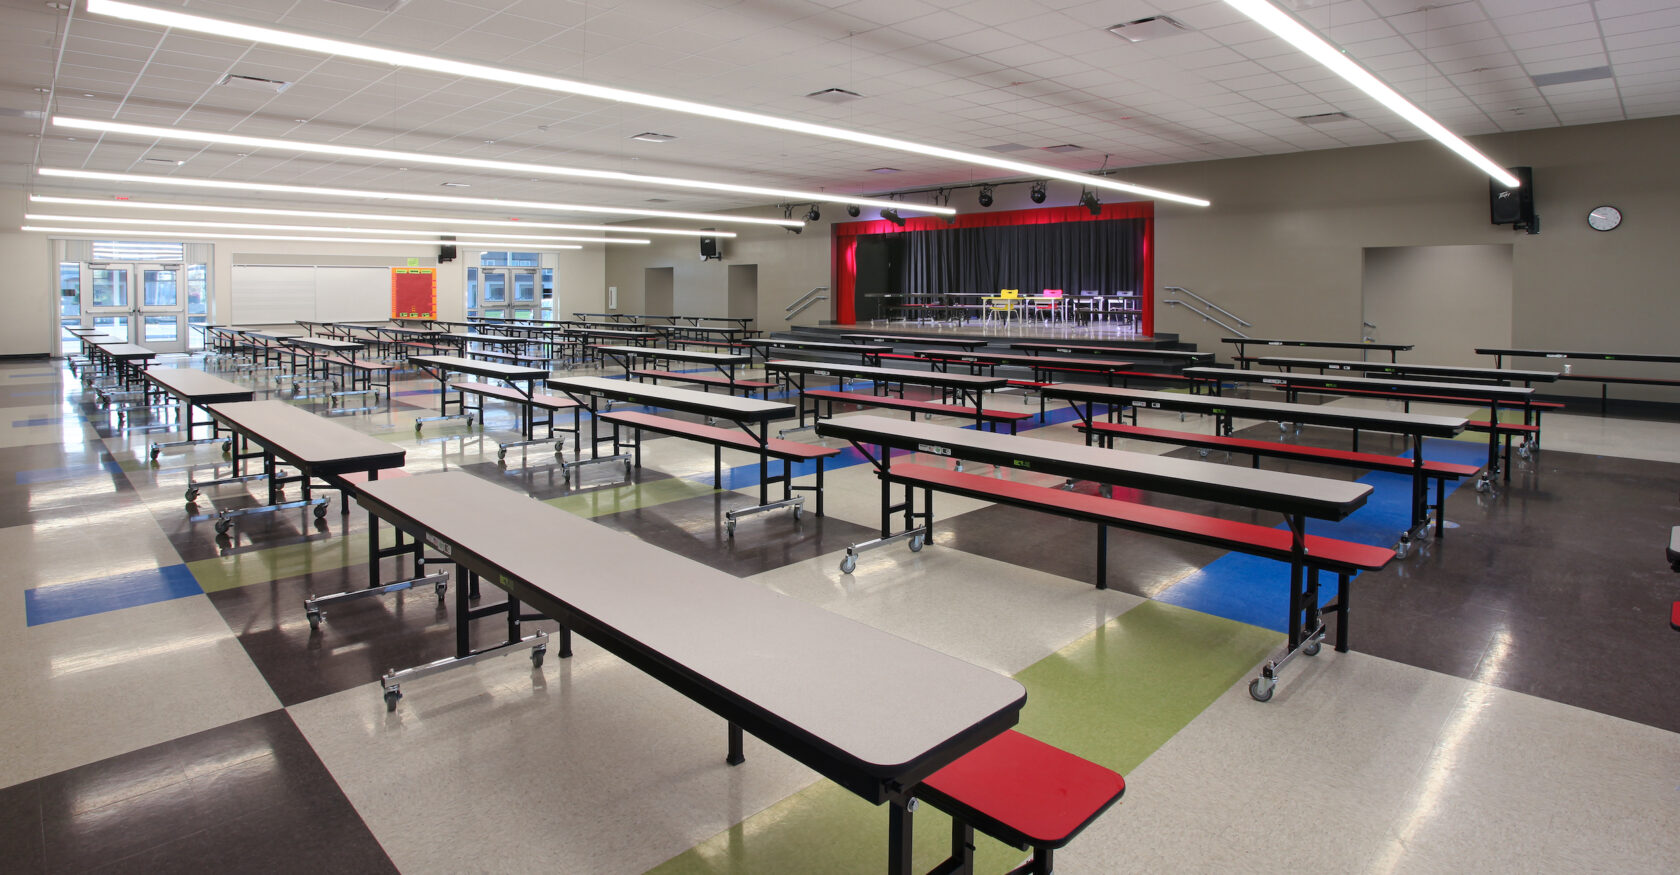 Belmont Elementary cafeteria